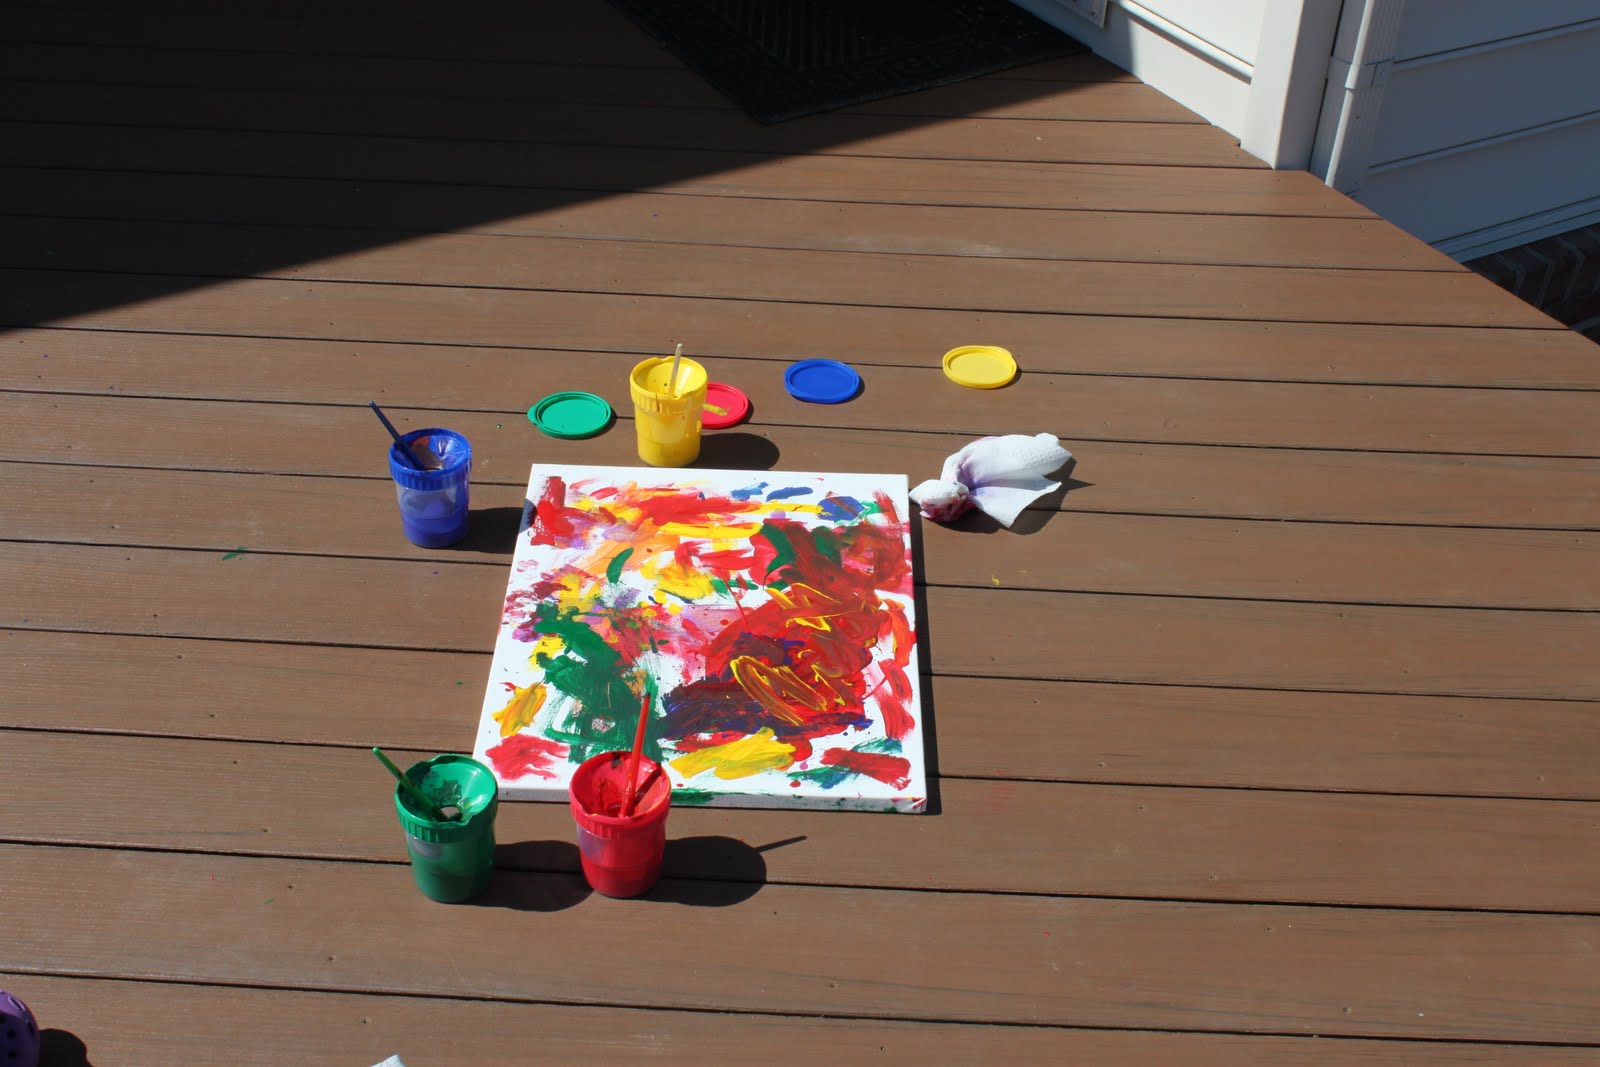 Calendar of :: Art on the Lawn - Kids Canvas Painting :: Ft